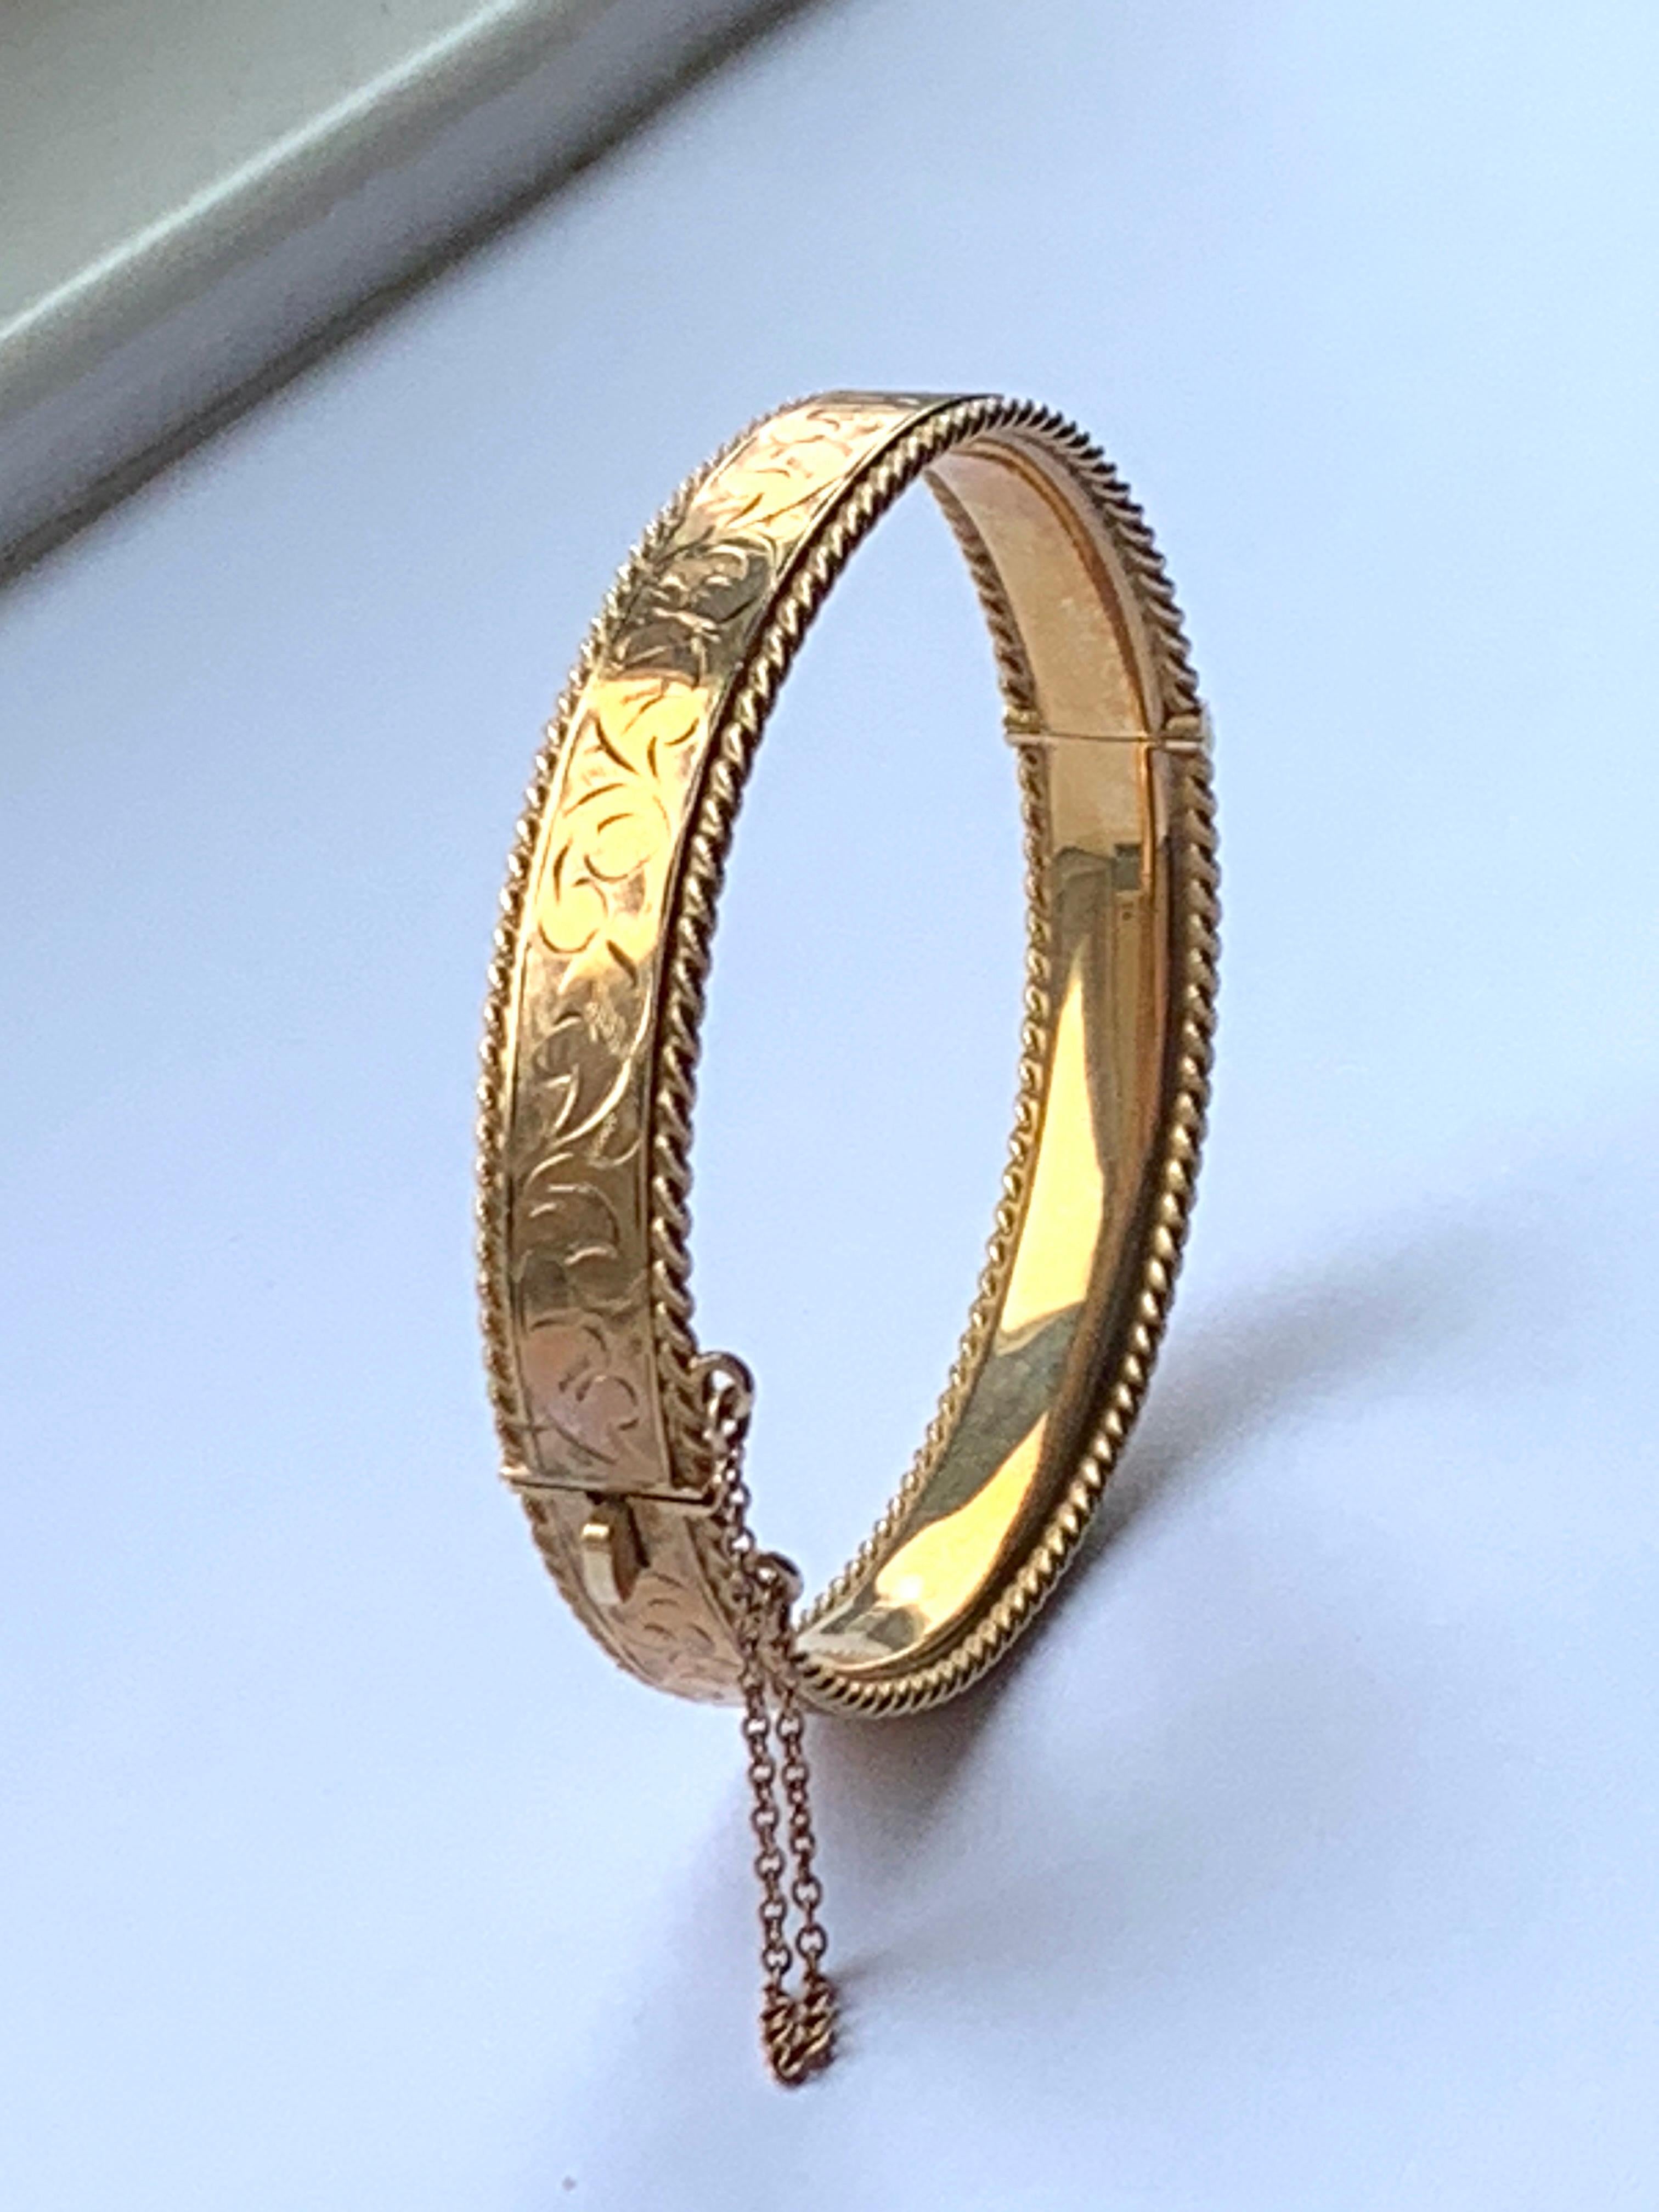 9ct 375 Gold Bracelet
With beautiful floral en-scrolling engraving
Tight and secure fastener - with strong safety chain
Makers PPLd - Payton Pepper Limited
Dated 1964
Perimeter 17.45 cm : 6.8 Inches
Maximum wrist fit 6.25 Inches
Bracelet Depth   8mm